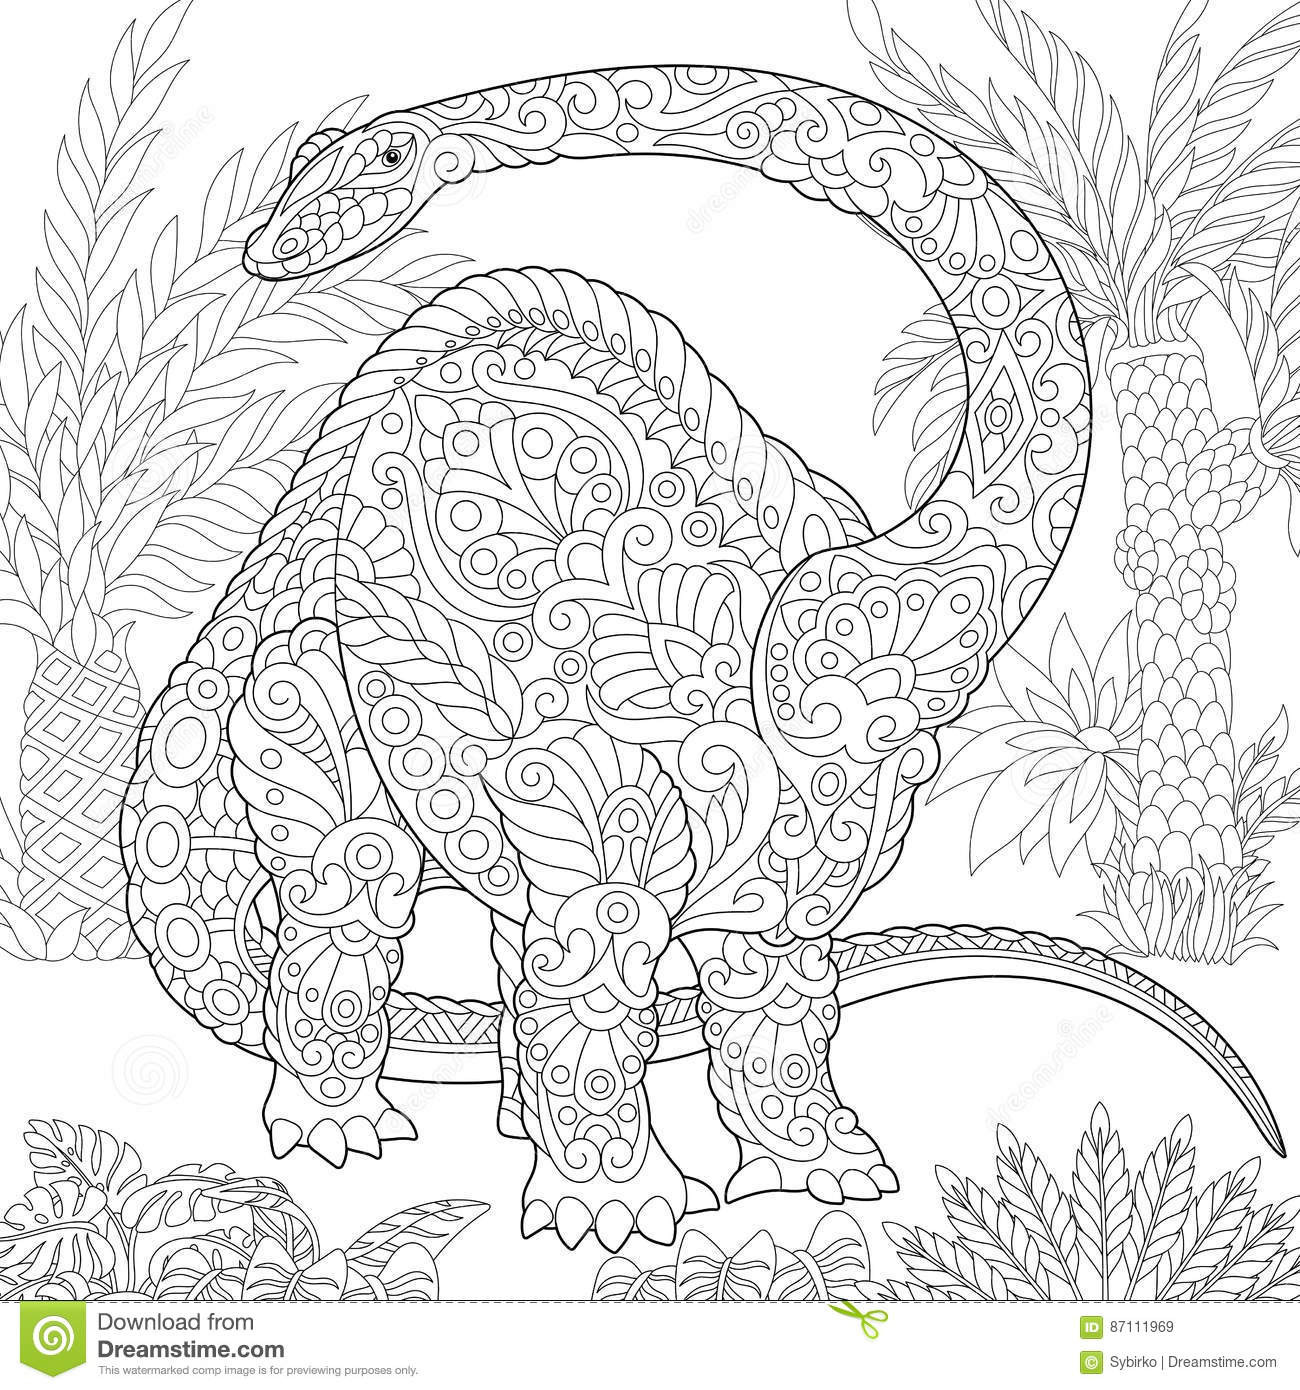 Dinosaur Coloring Pages For Adults
 Zentangle Brontosaurus Dinosaur Stock Vector